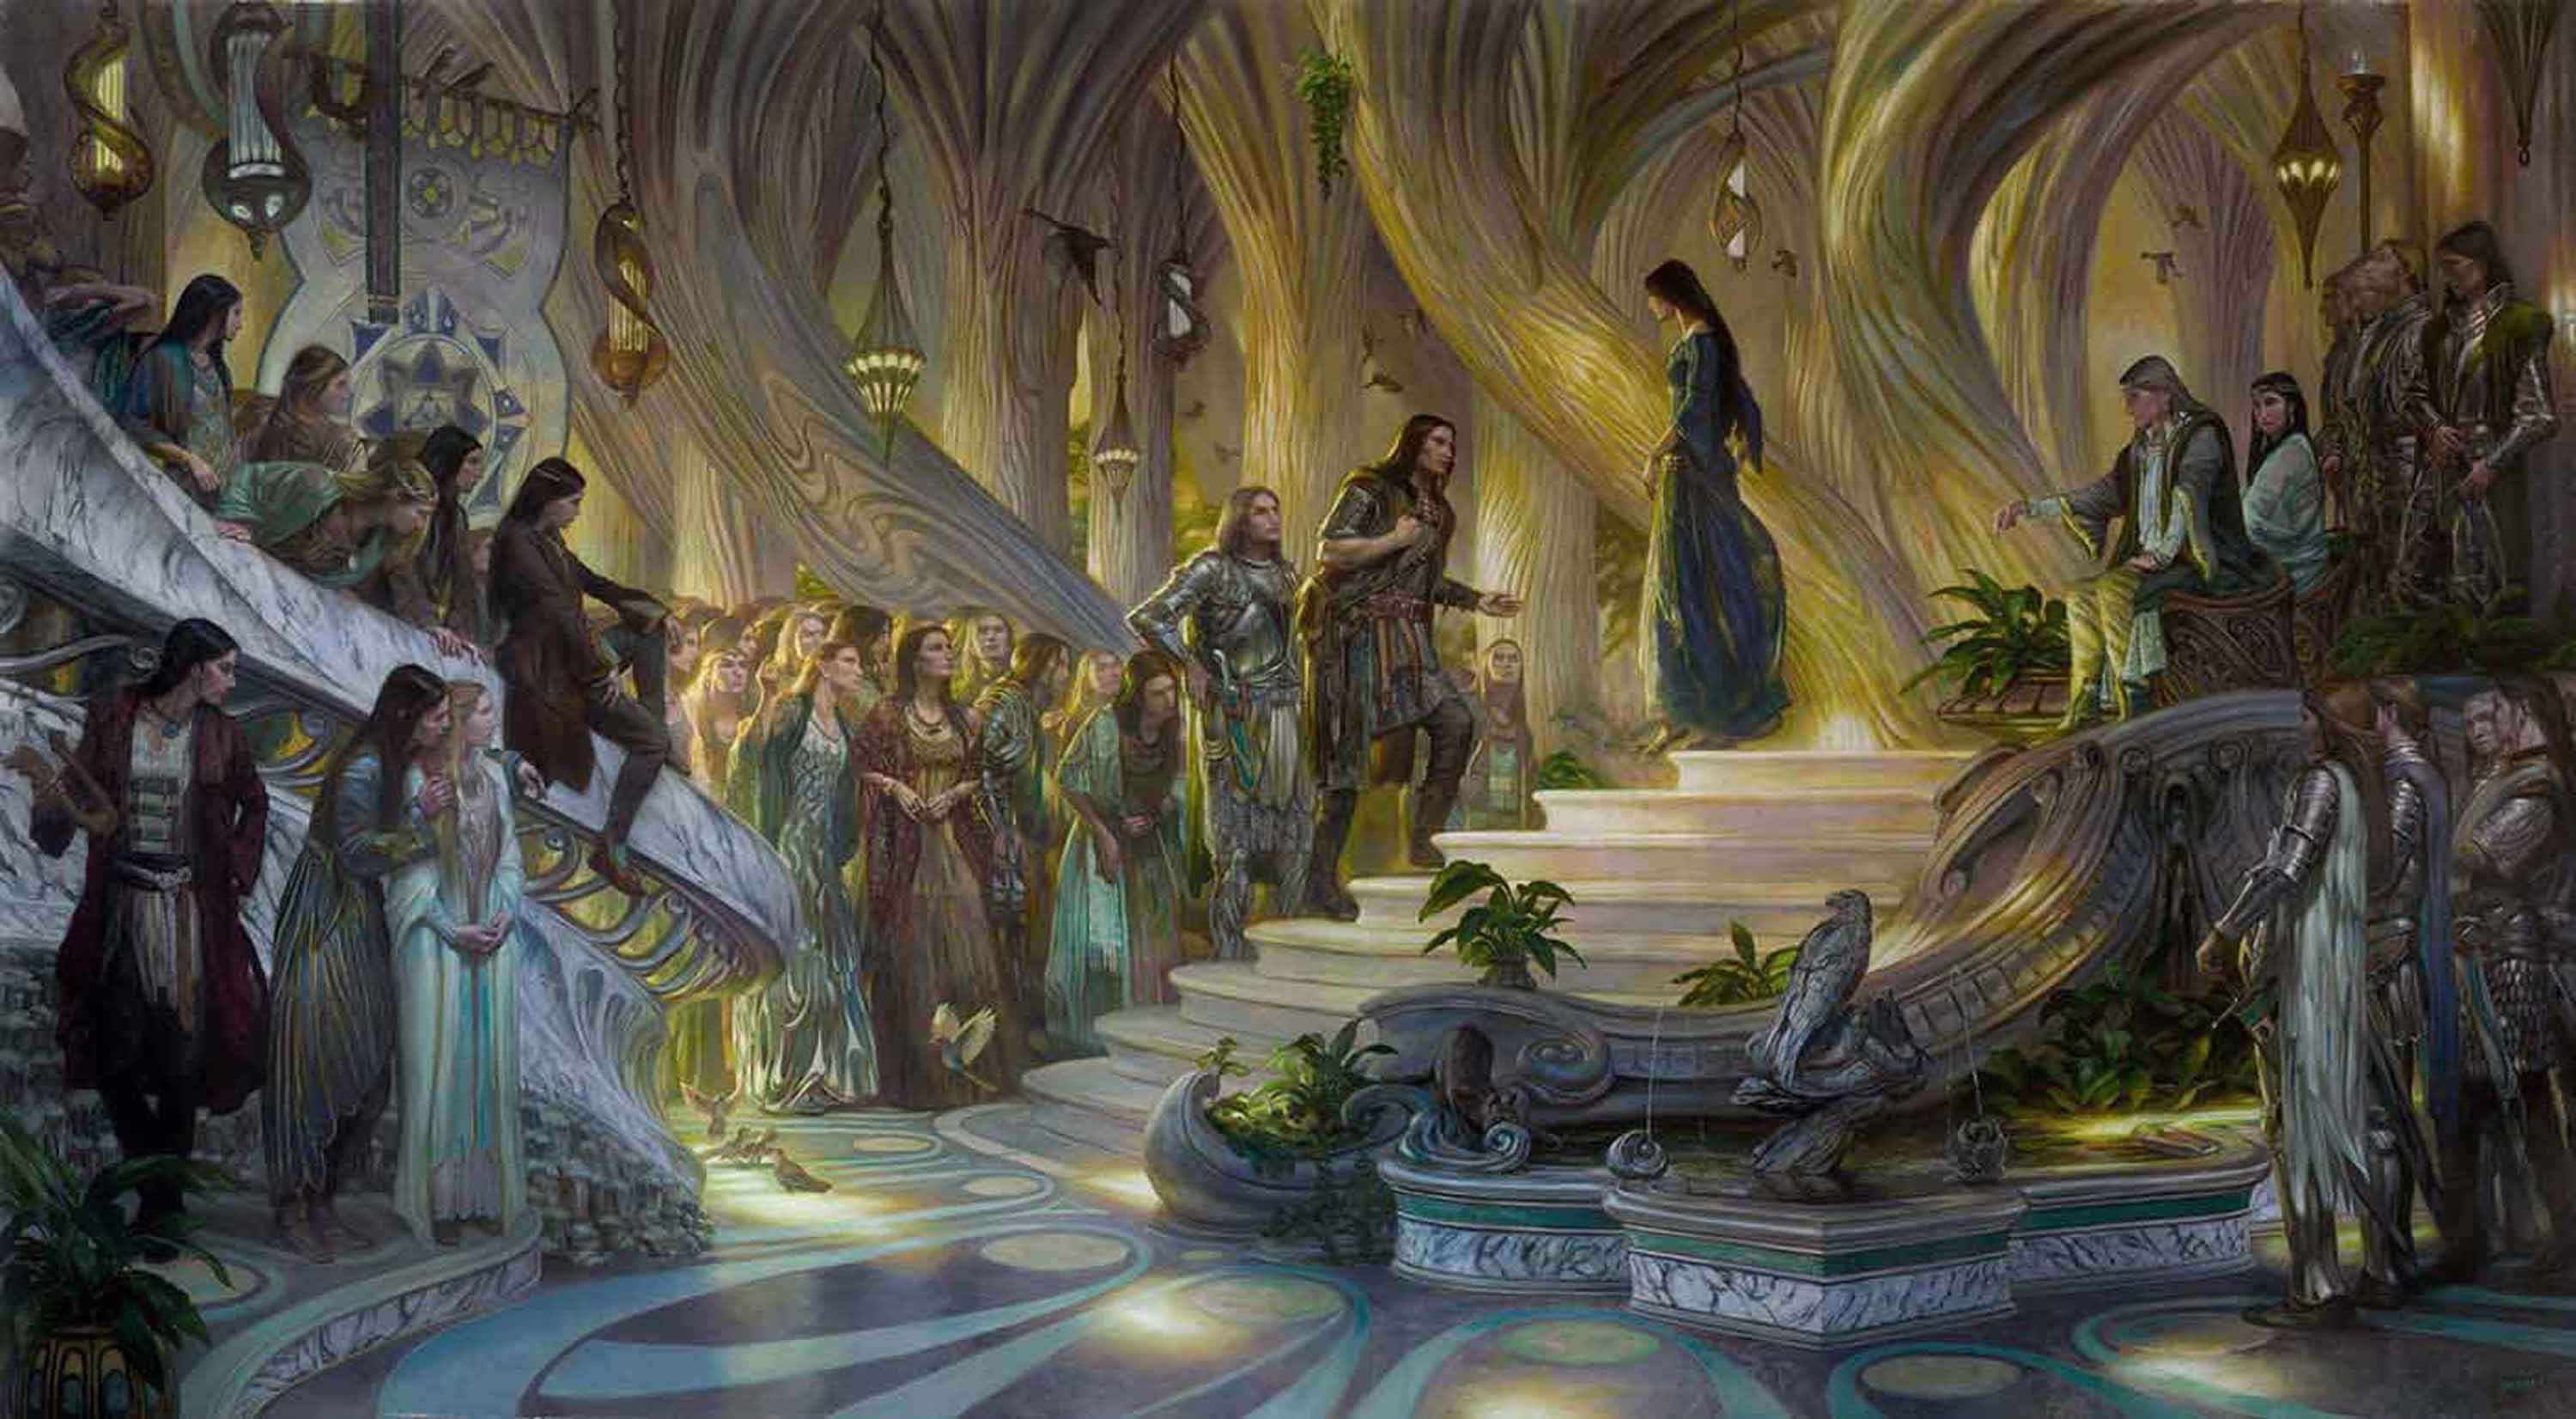 Beren and Luthien in the Court of Thingol and Melian
60" x 110"  Oil on Linen  2015
the declaration of love for Luthien by Beren and Thingol's demand for a Silmaril, from J.R.R. Tolkien's The Silmarillion
private collection